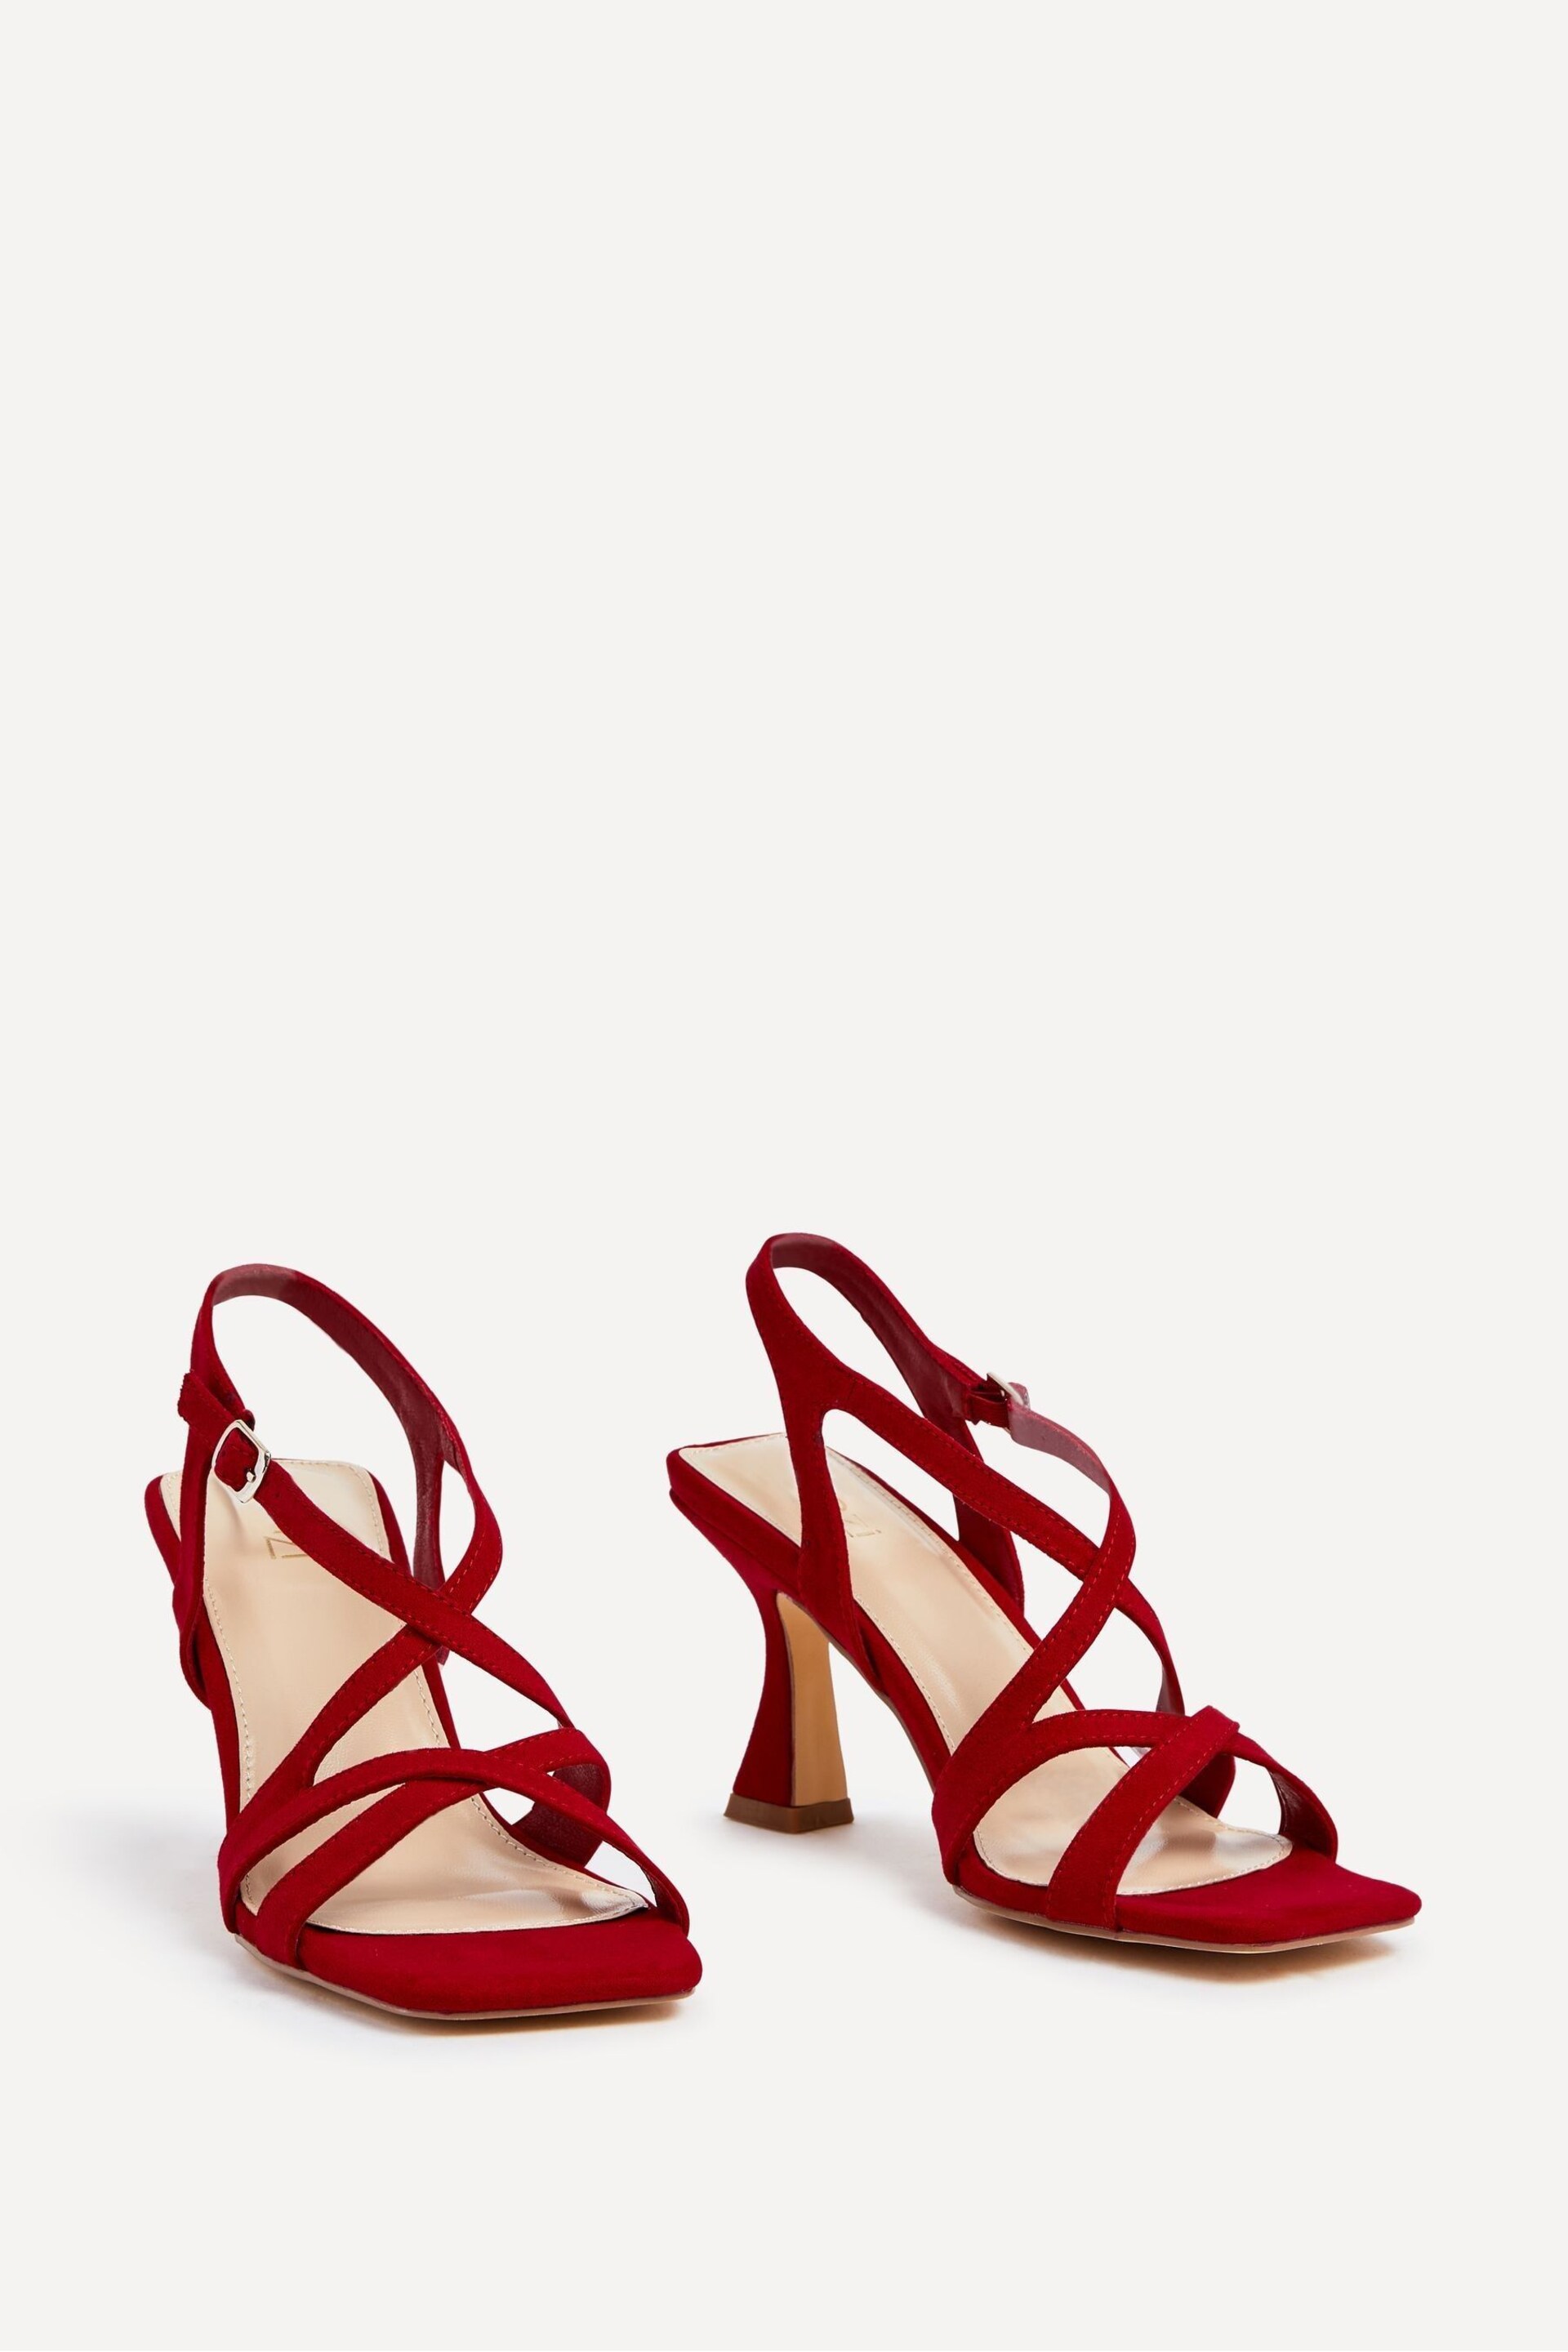 Linzi Red Liberty Open Toe Strappy Heeled Sandals With Flared Stiletto - Image 3 of 5